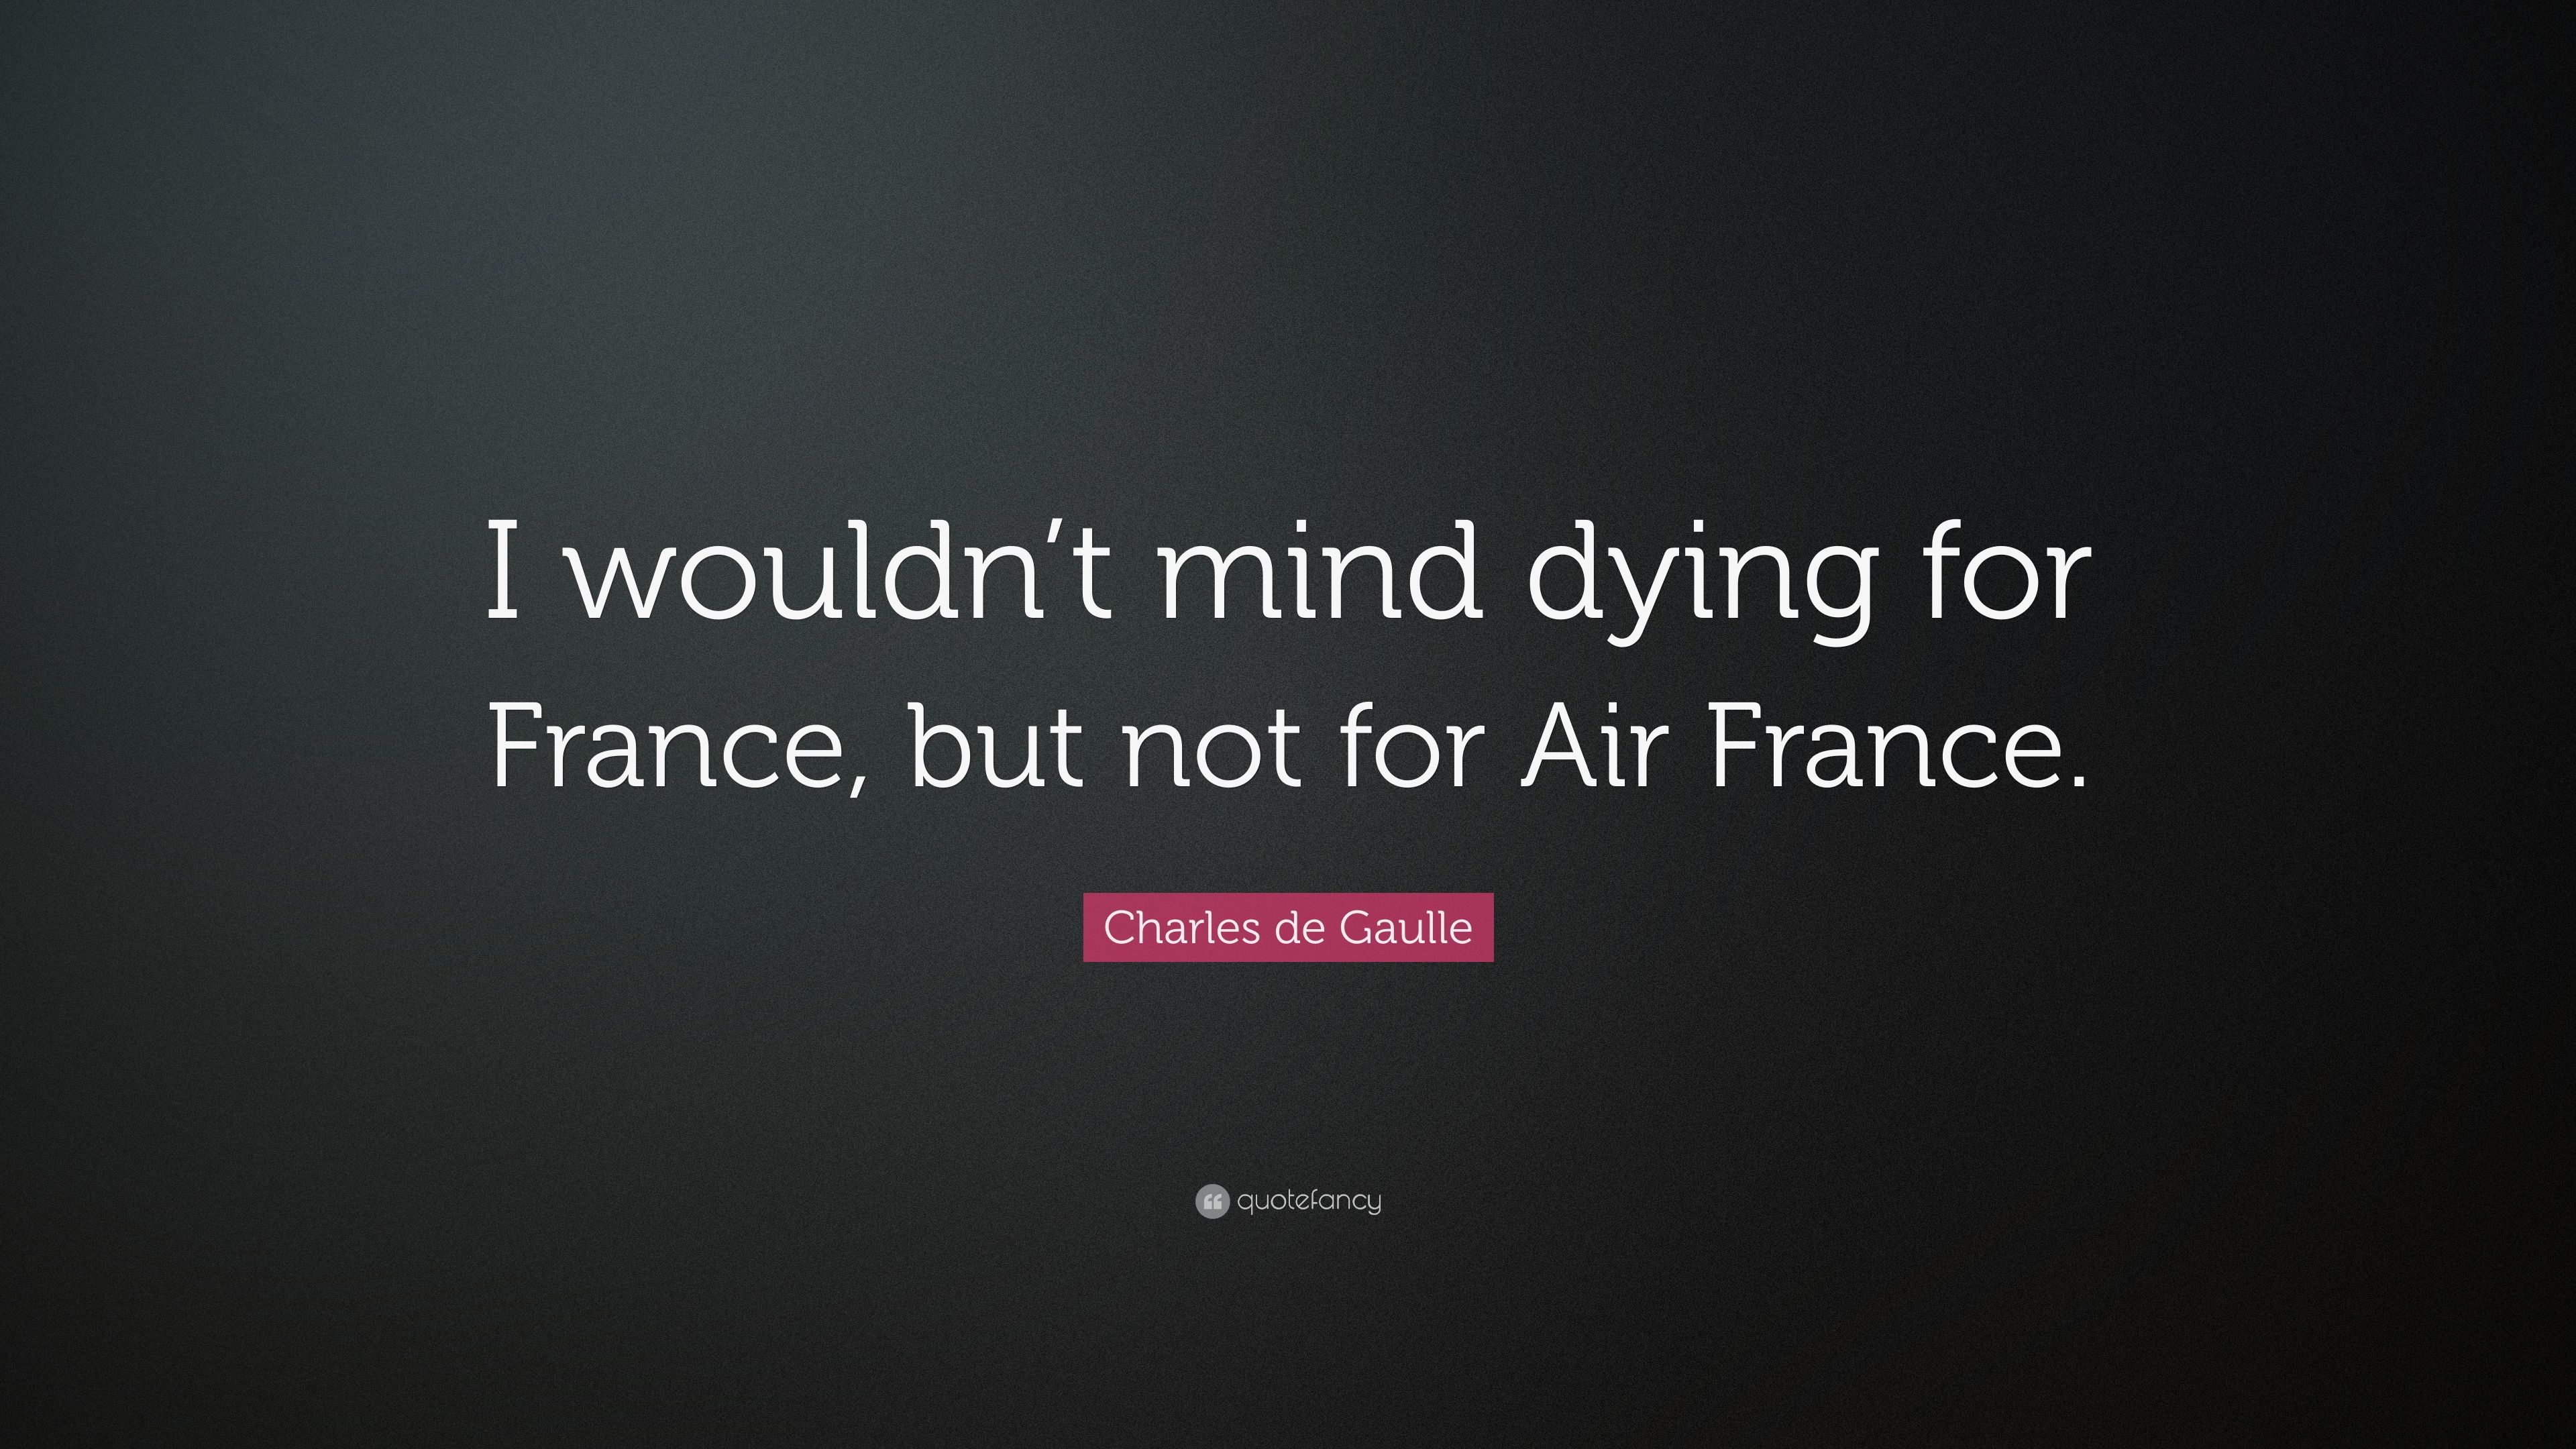 Charles de Gaulle Quote: “I wouldn't mind dying for France, but not